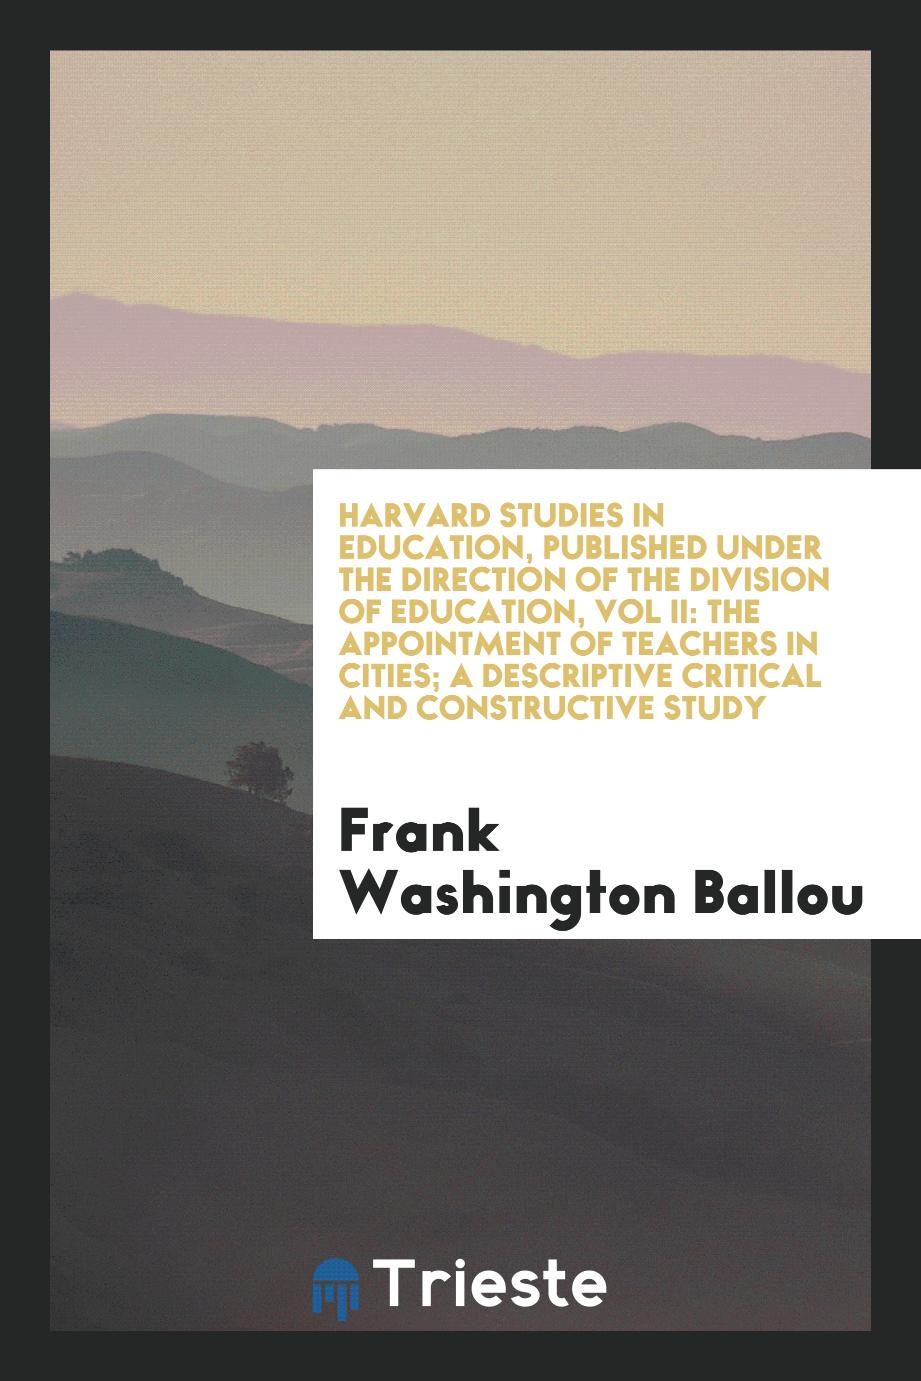 Harvard Studies in Education, Published Under the Direction of the Division of Education, Vol II: The Appointment of Teachers in Cities; A Descriptive Critical and Constructive Study